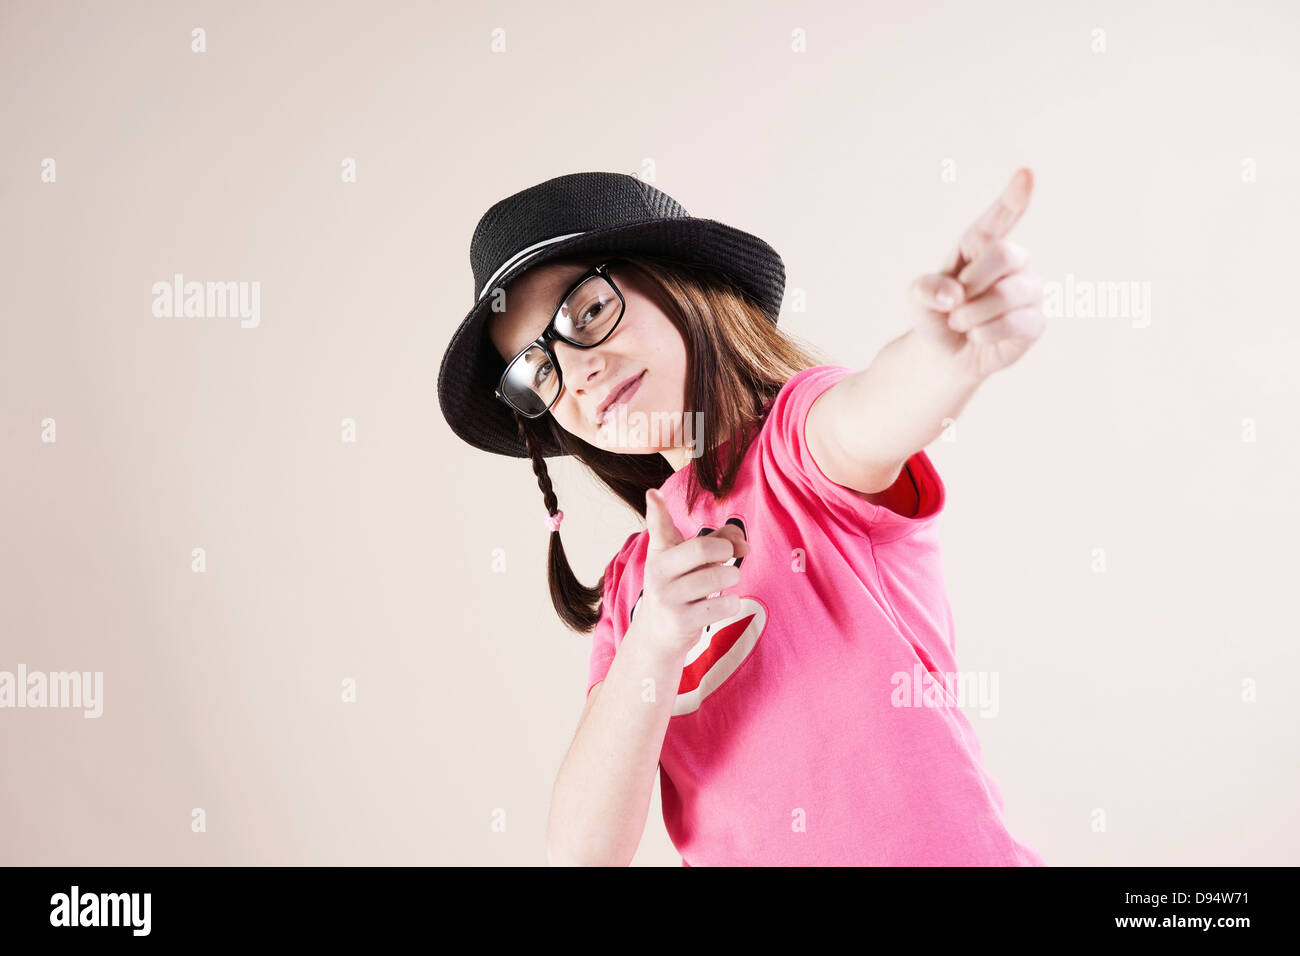 Portrait of Girl wearing Fedora and Horn-rimmed Eyeglasses, Pointing and Smiling at Camera, Studio Shot on White Background Stock Photo